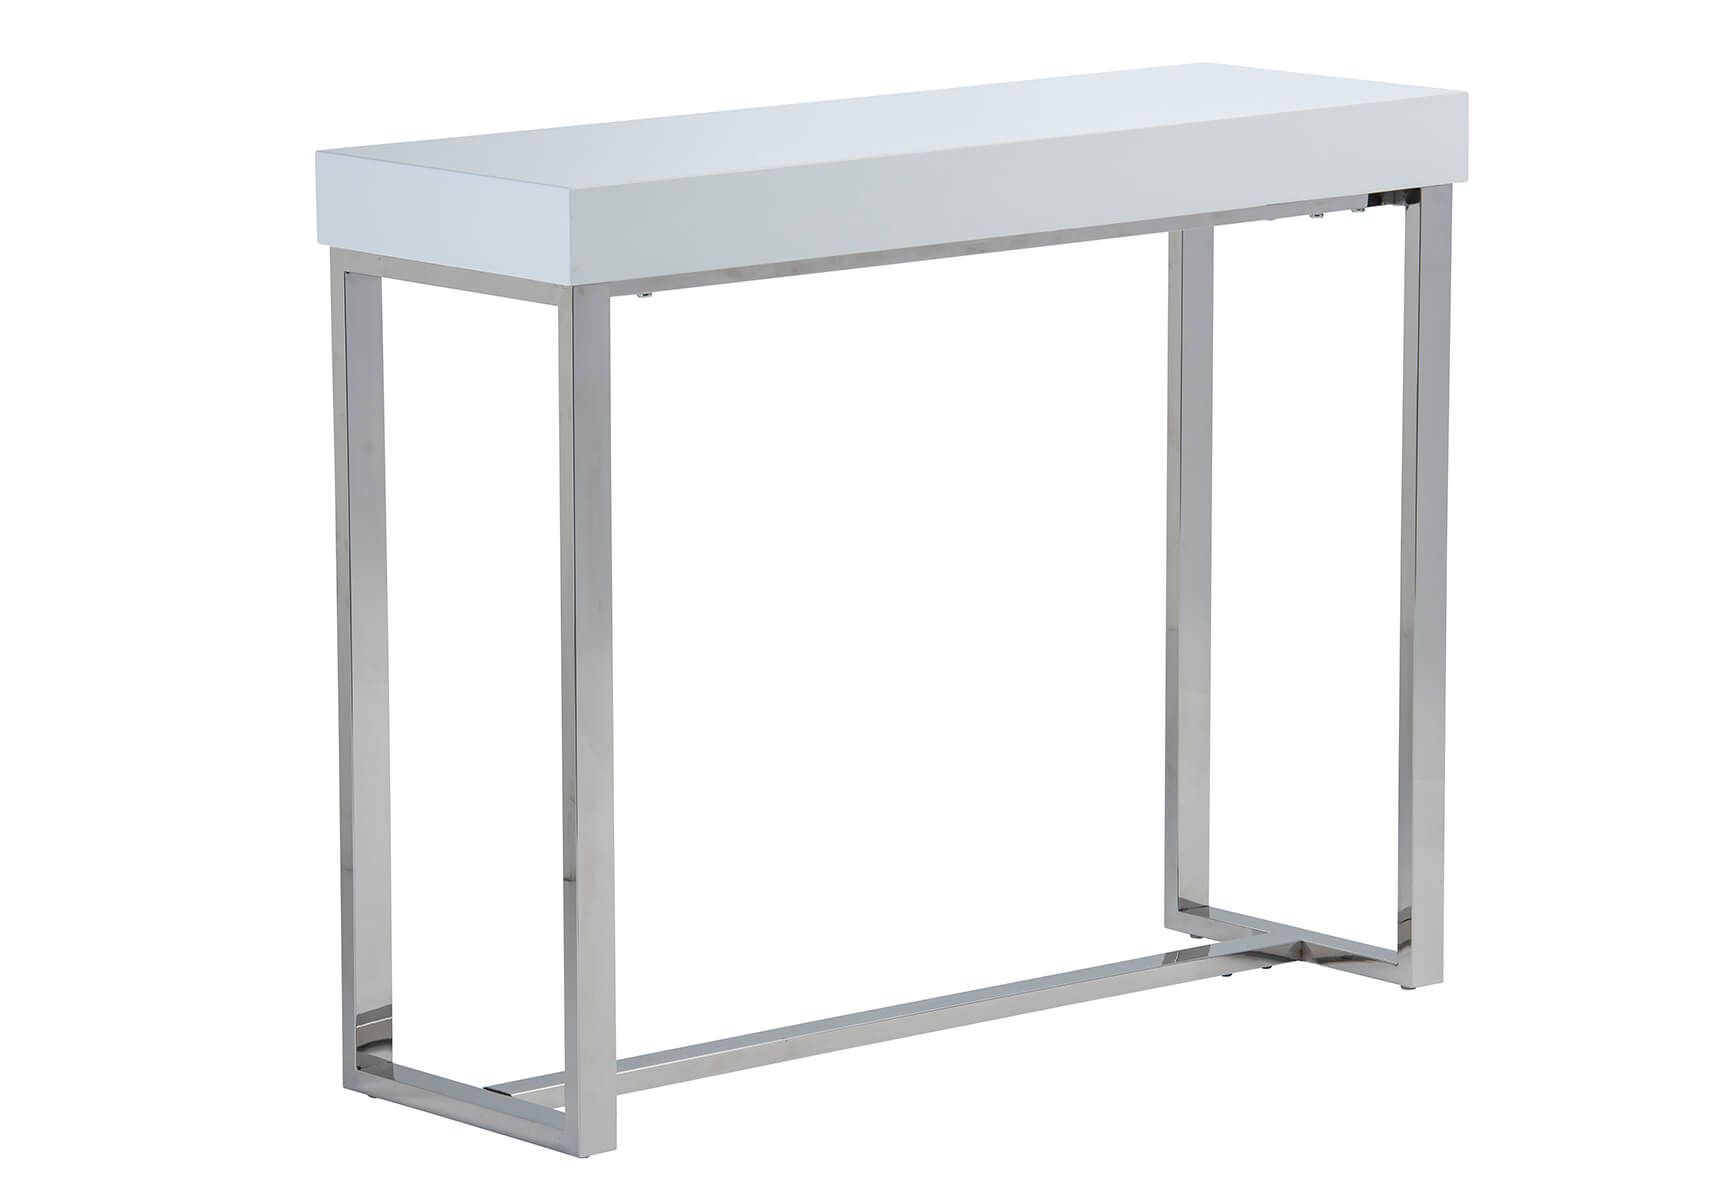 Franklin Console Table In White Gloss With Regard To White Gloss And Maple Cream Console Tables (View 9 of 20)